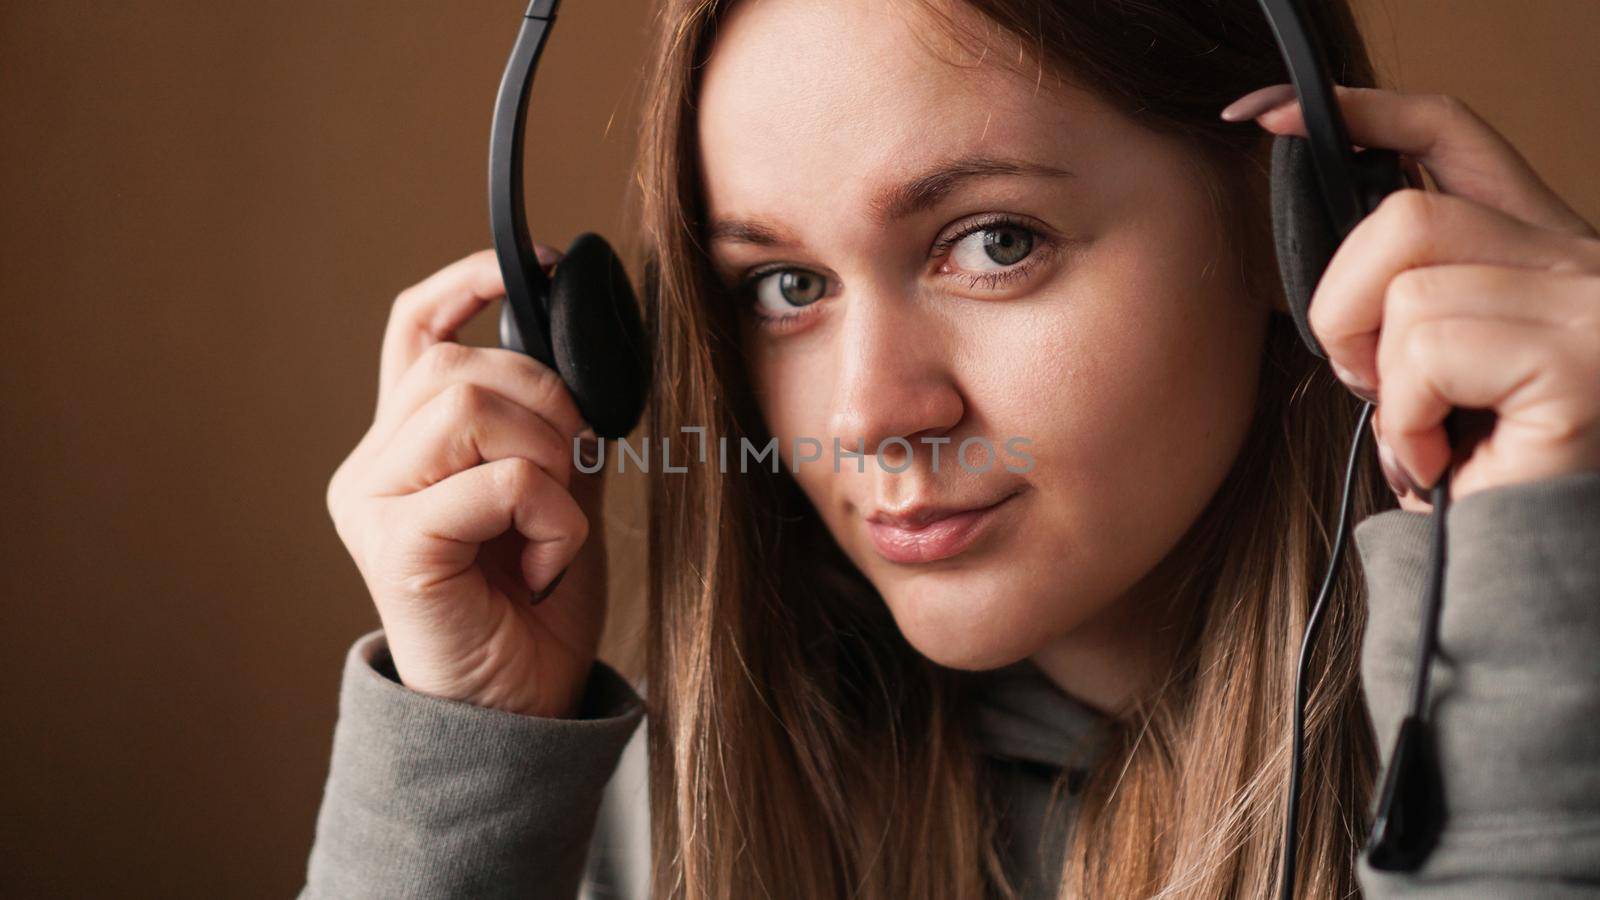 Portrait of a young girl in a hoodie puts on a headset. She looks at the camera and smiles. Call center worker. Remote work from home. Brown tones pictures